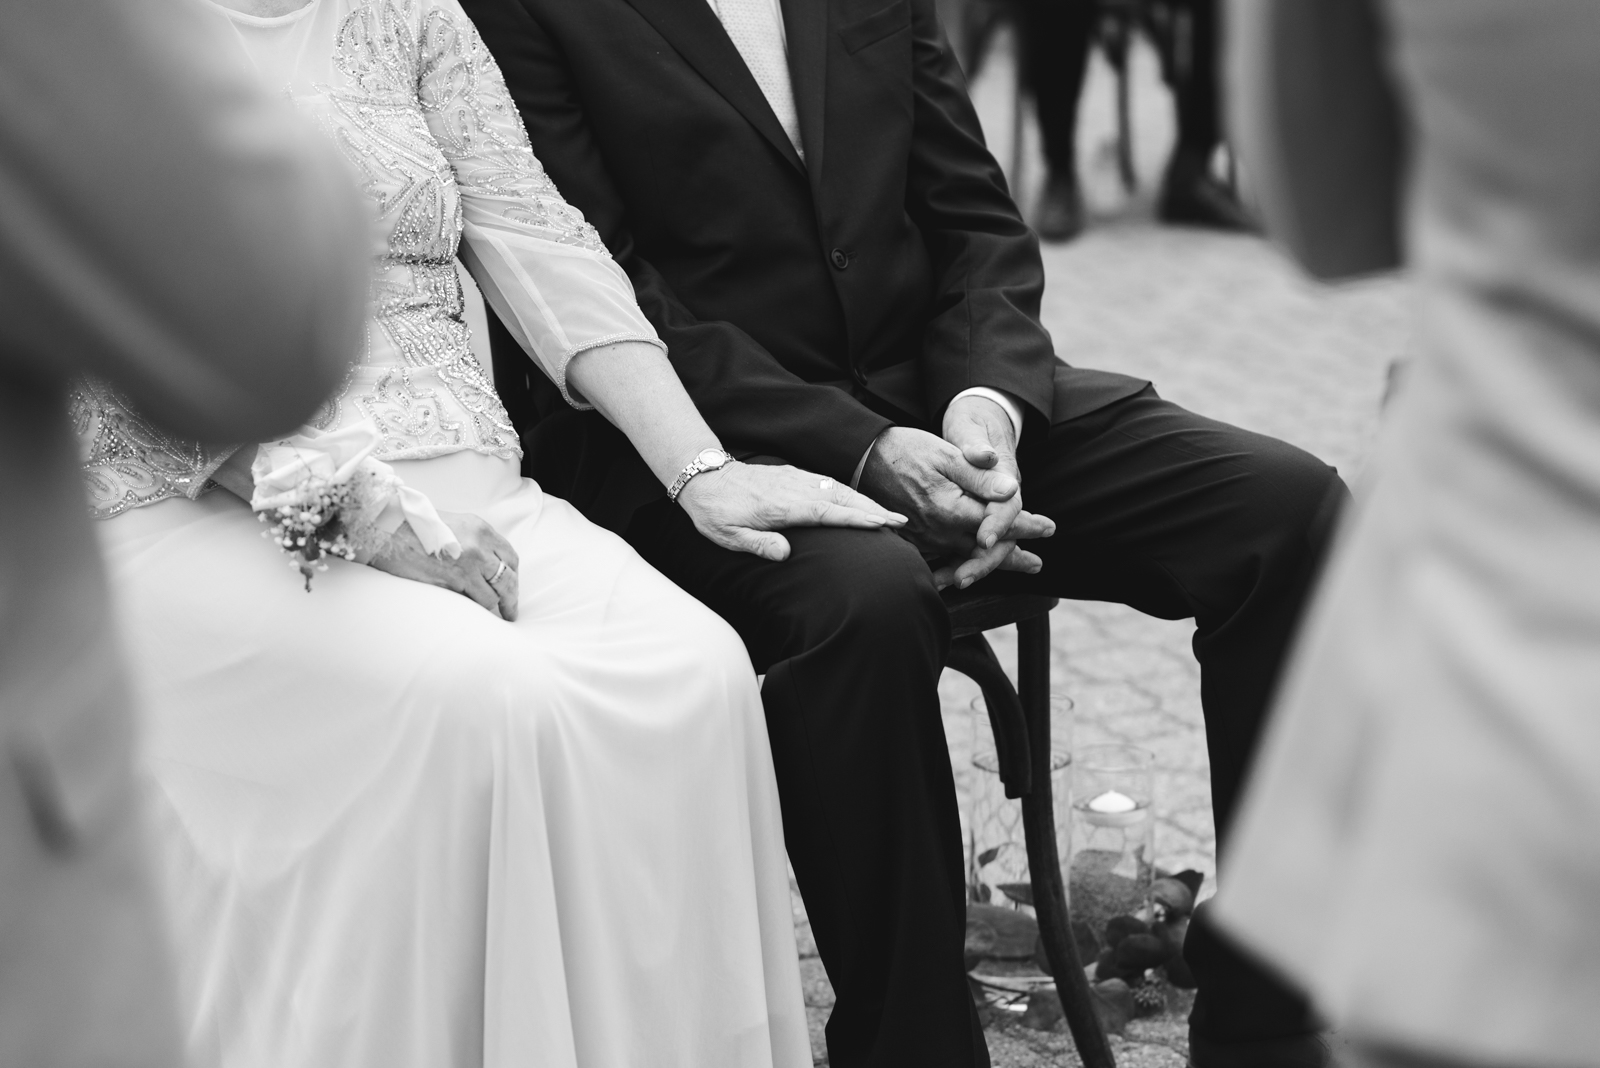 mother of the bride with her hand on father's lap during wedding ceremony